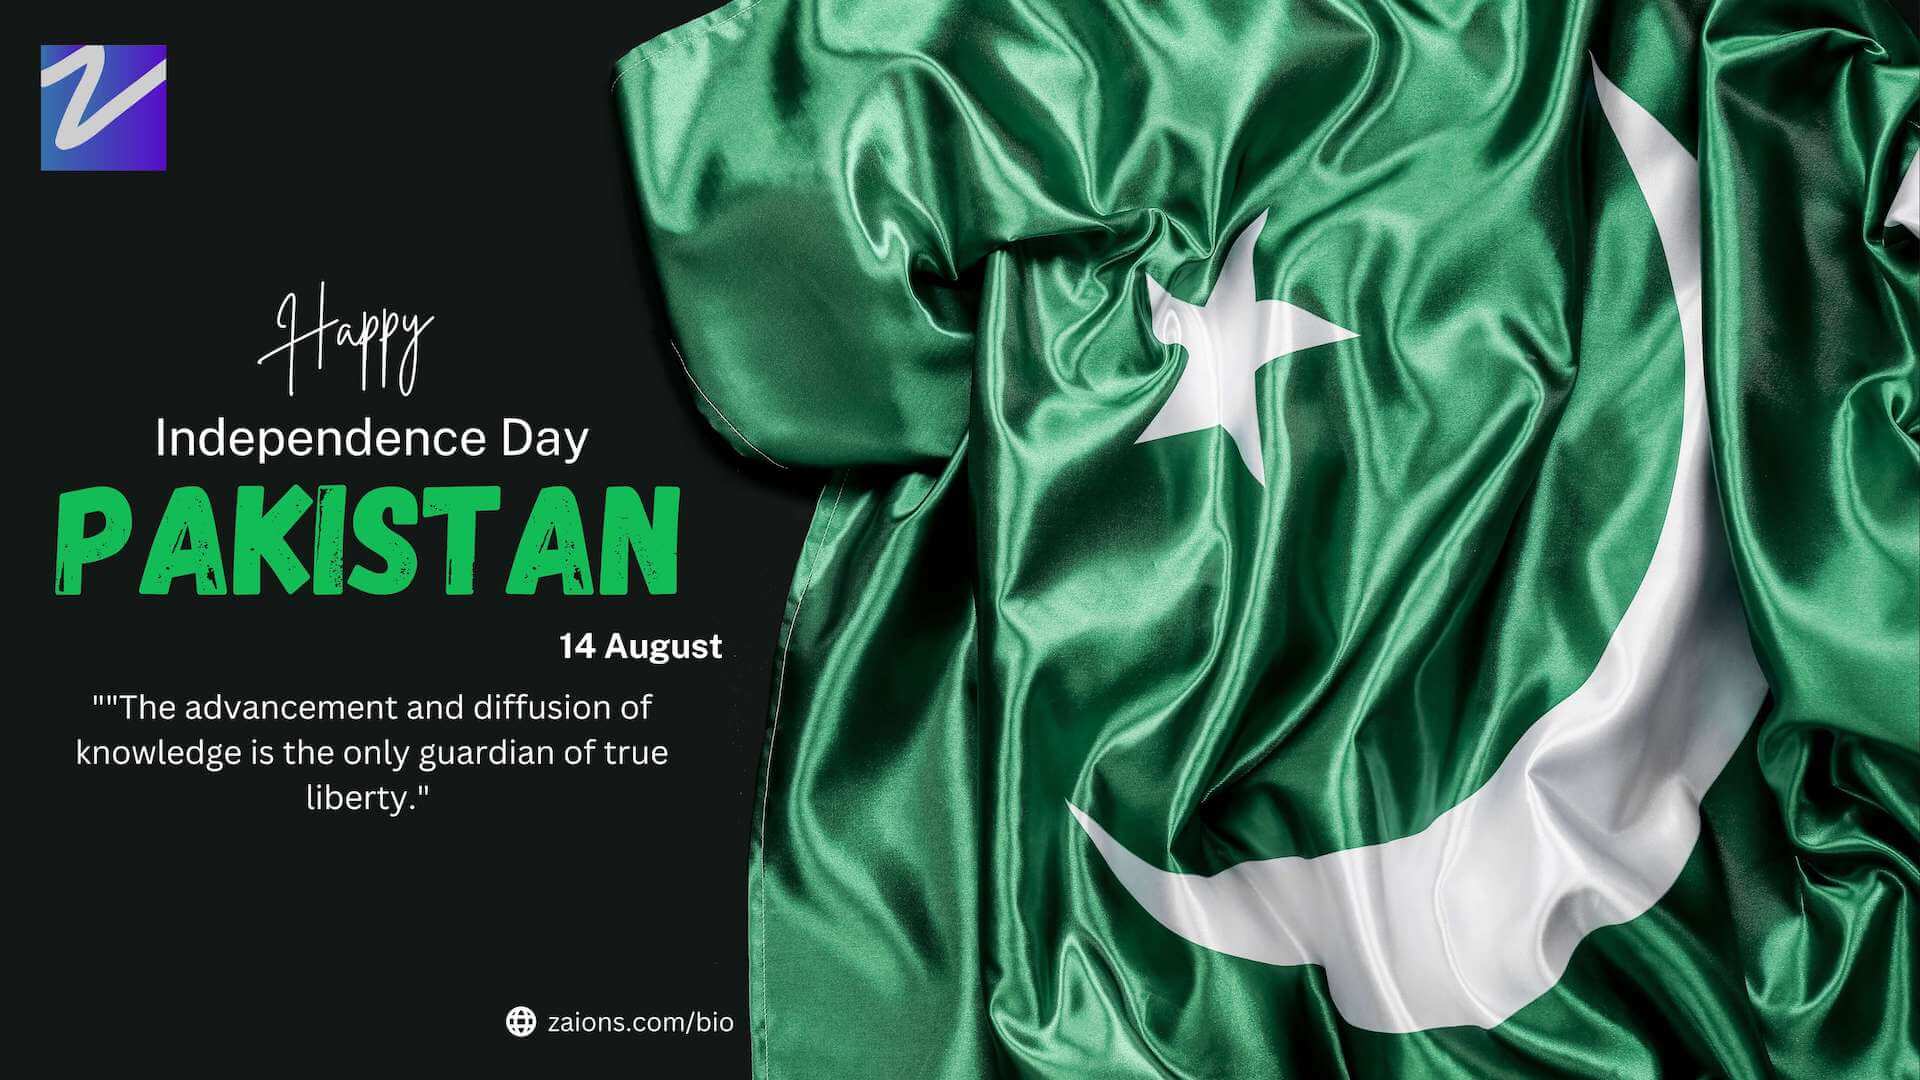 Pakistan 76th independence day celebration - created by Zaions - ahsan mahmood - aoneahsan - website post